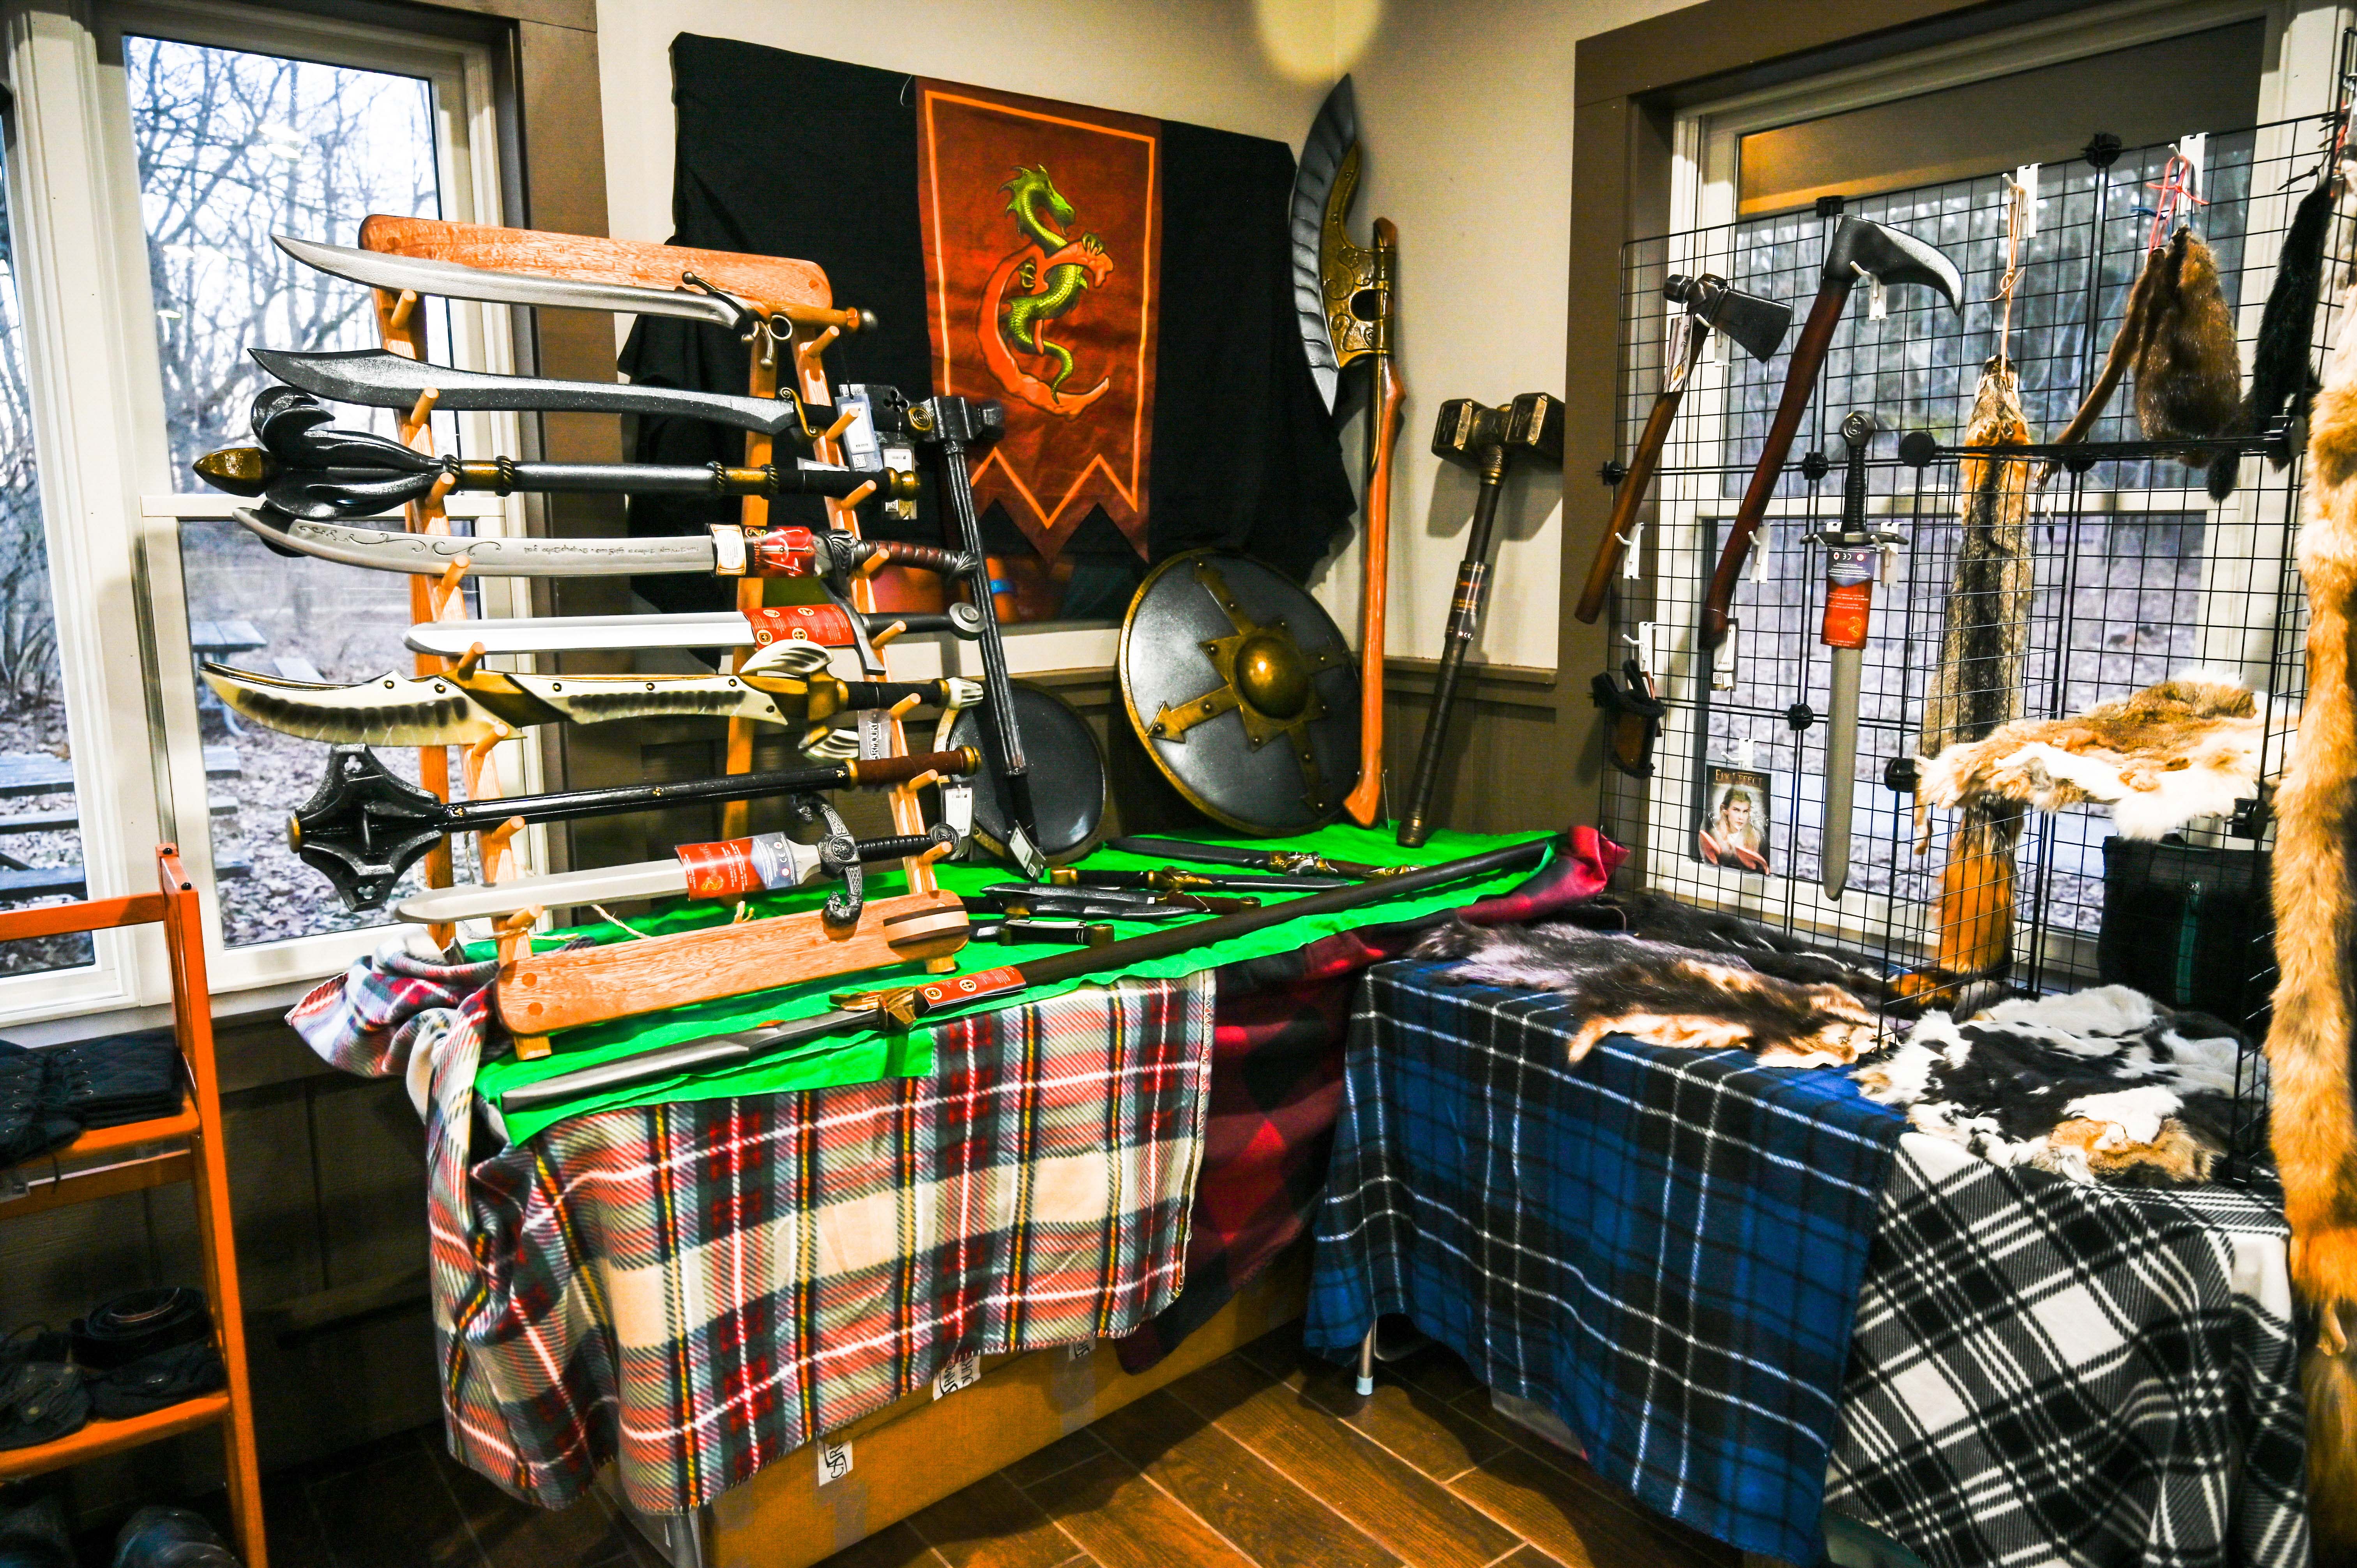 alliance south michigan larp early set up with epic armoury flails, axe, swords, shields, calimacil hammers, and furs